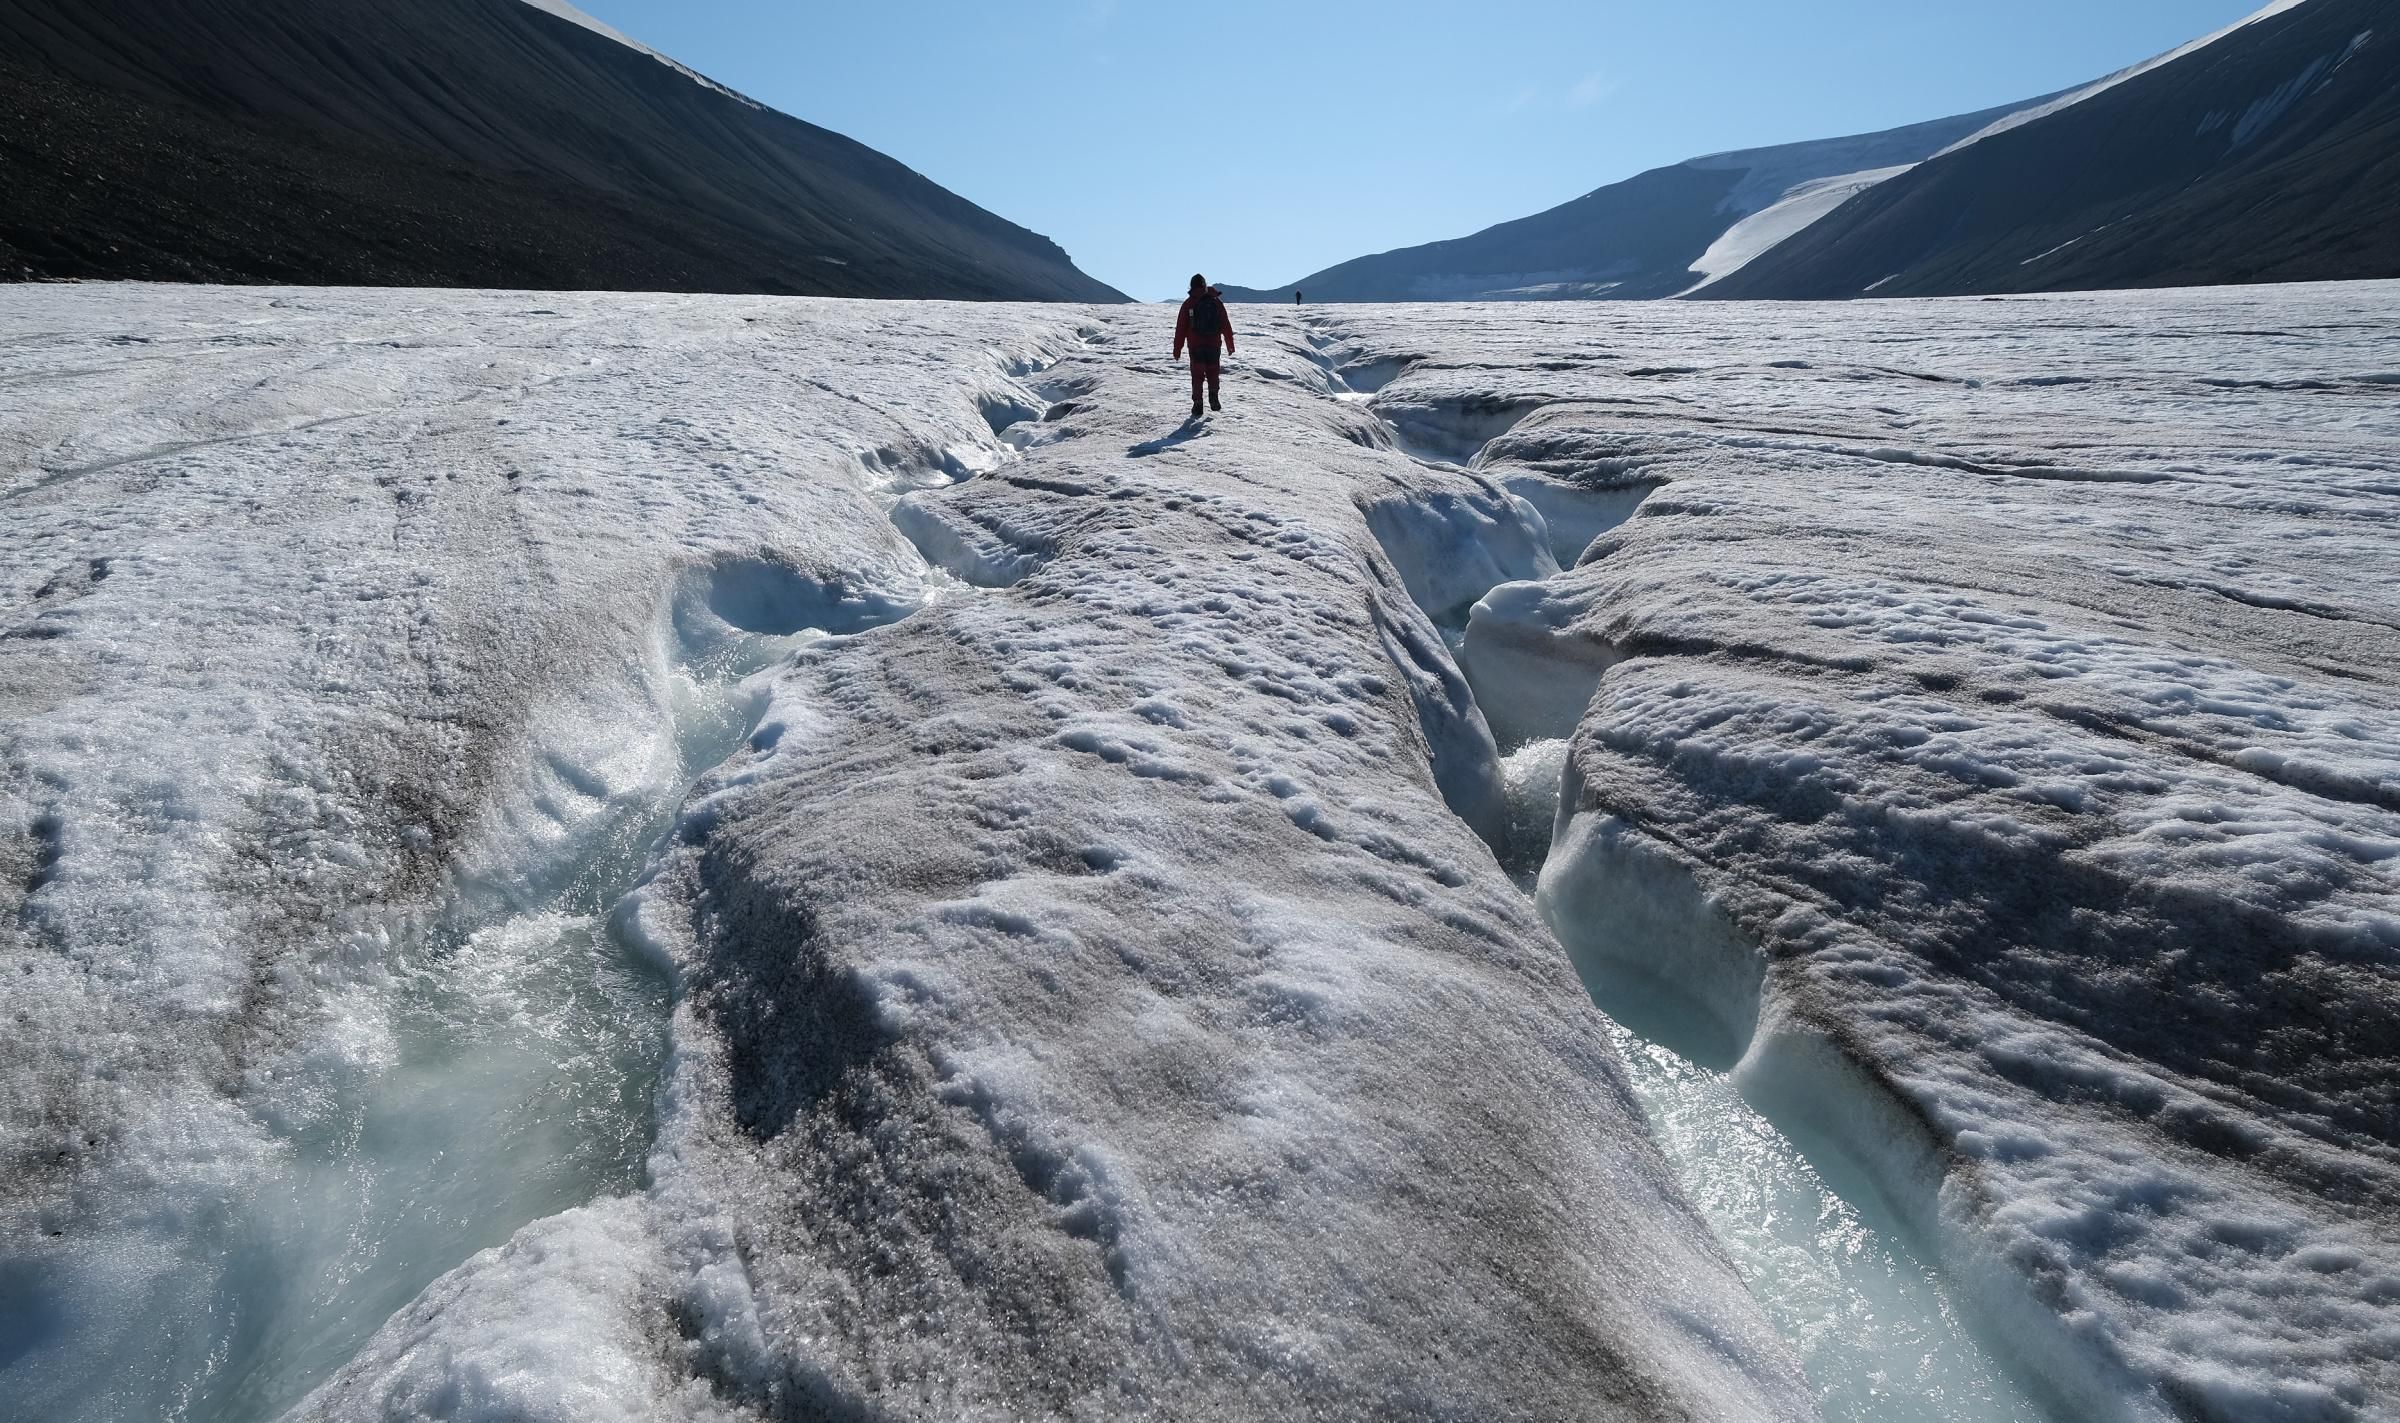 A hiker walks along winding channels carved by water on the surface of the melting Longyearbreen glacier during a summer heatwave on Svalbard archipelago on July 31, 2020 near Longyearbyen, Norway. (Photo: Sean Gallup via Getty Images)